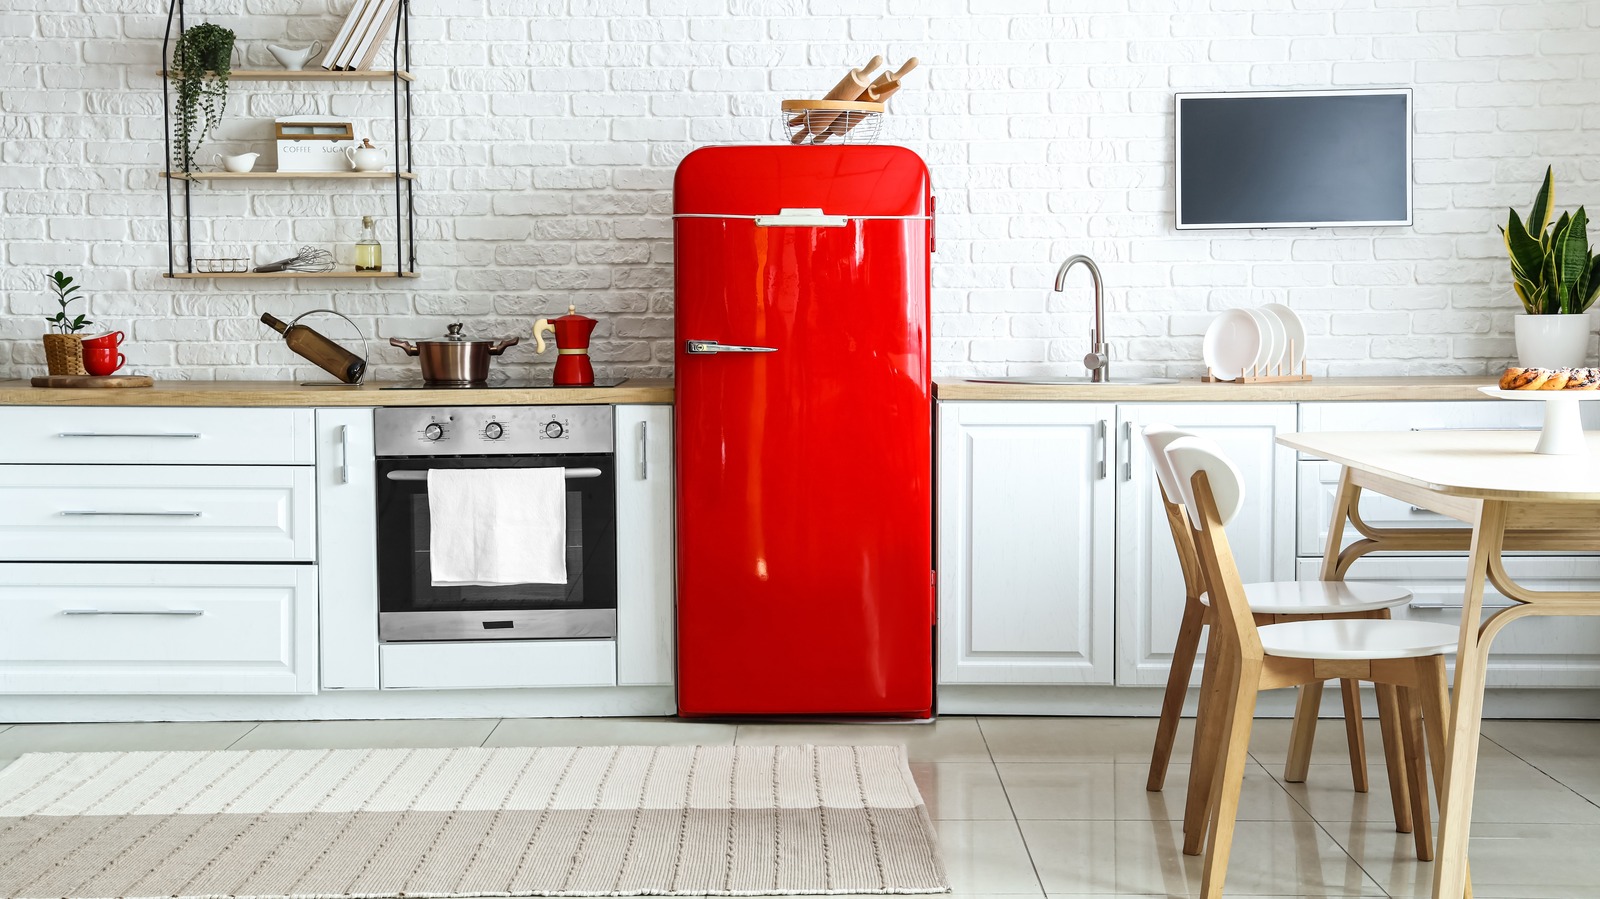 https://www.housedigest.com/img/gallery/mix-and-match-your-colored-appliances-the-right-way/l-intro-1678301447.jpg